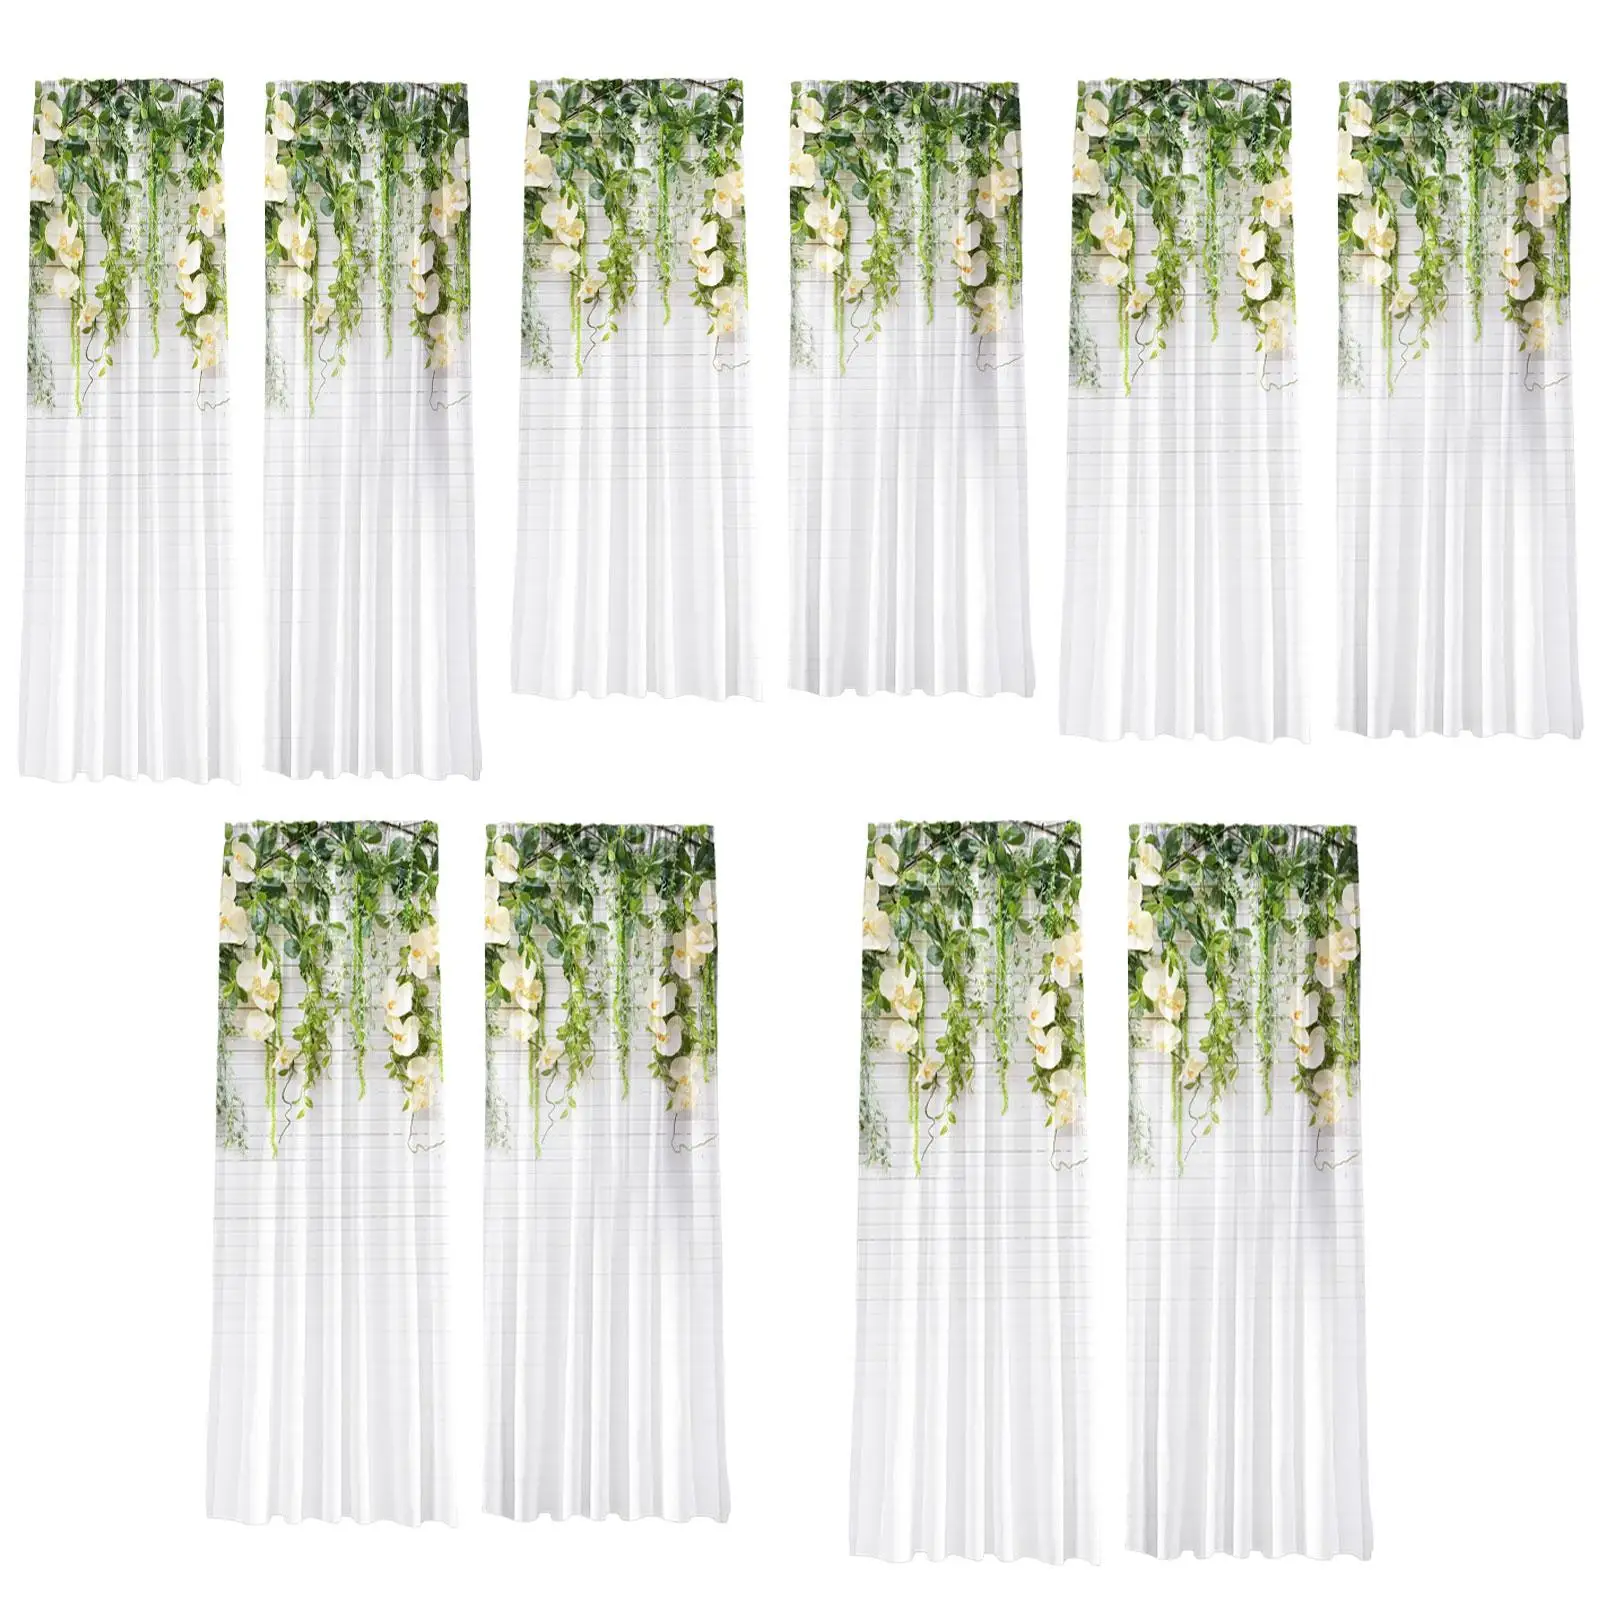 Plants Digital Printing Blackout Curtains Drapes Thermal Insulated Curtain Easily Install Sturdy Polyester Fabric for Bedroom